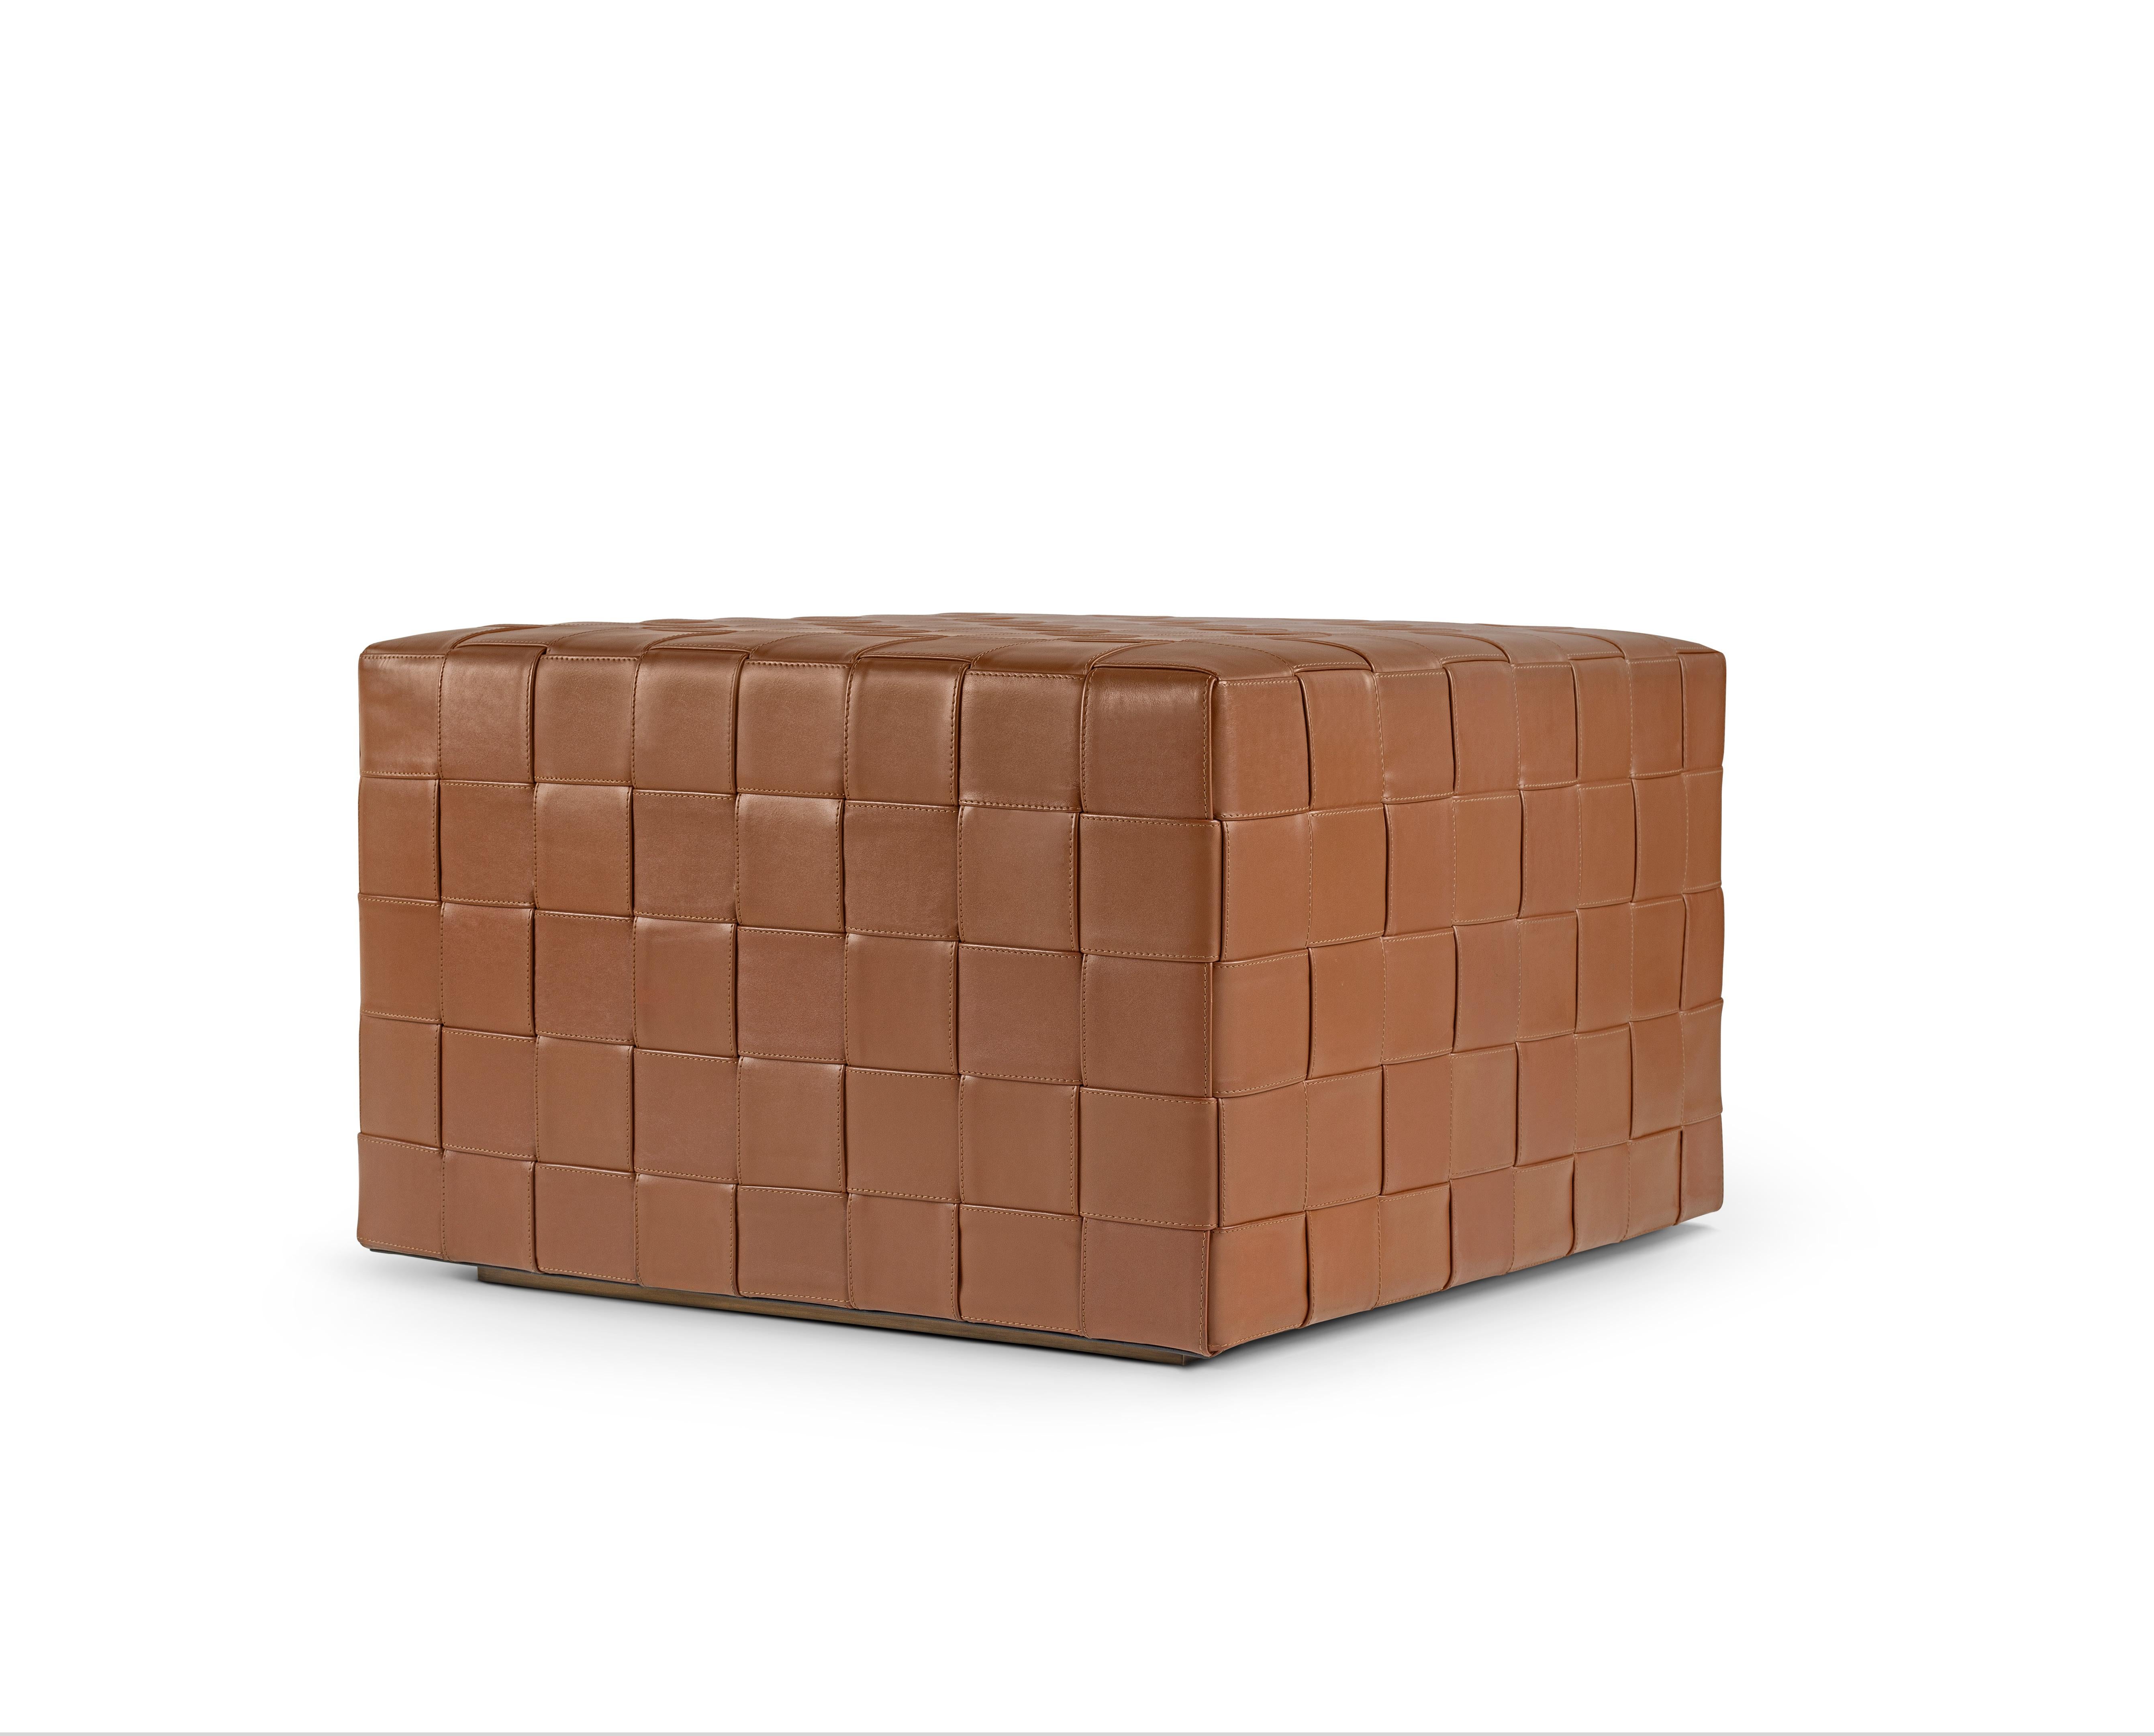 Arizona pouf by Madheke
Dimensions: D 61.5 x W 61.5 x H 41 cm
Materials: Leather, wood.

Classic soft leather weave with stitched edge detail and brass base.

Reflecting the finest in craftsmanship, innovation and heritage, Madheke creates